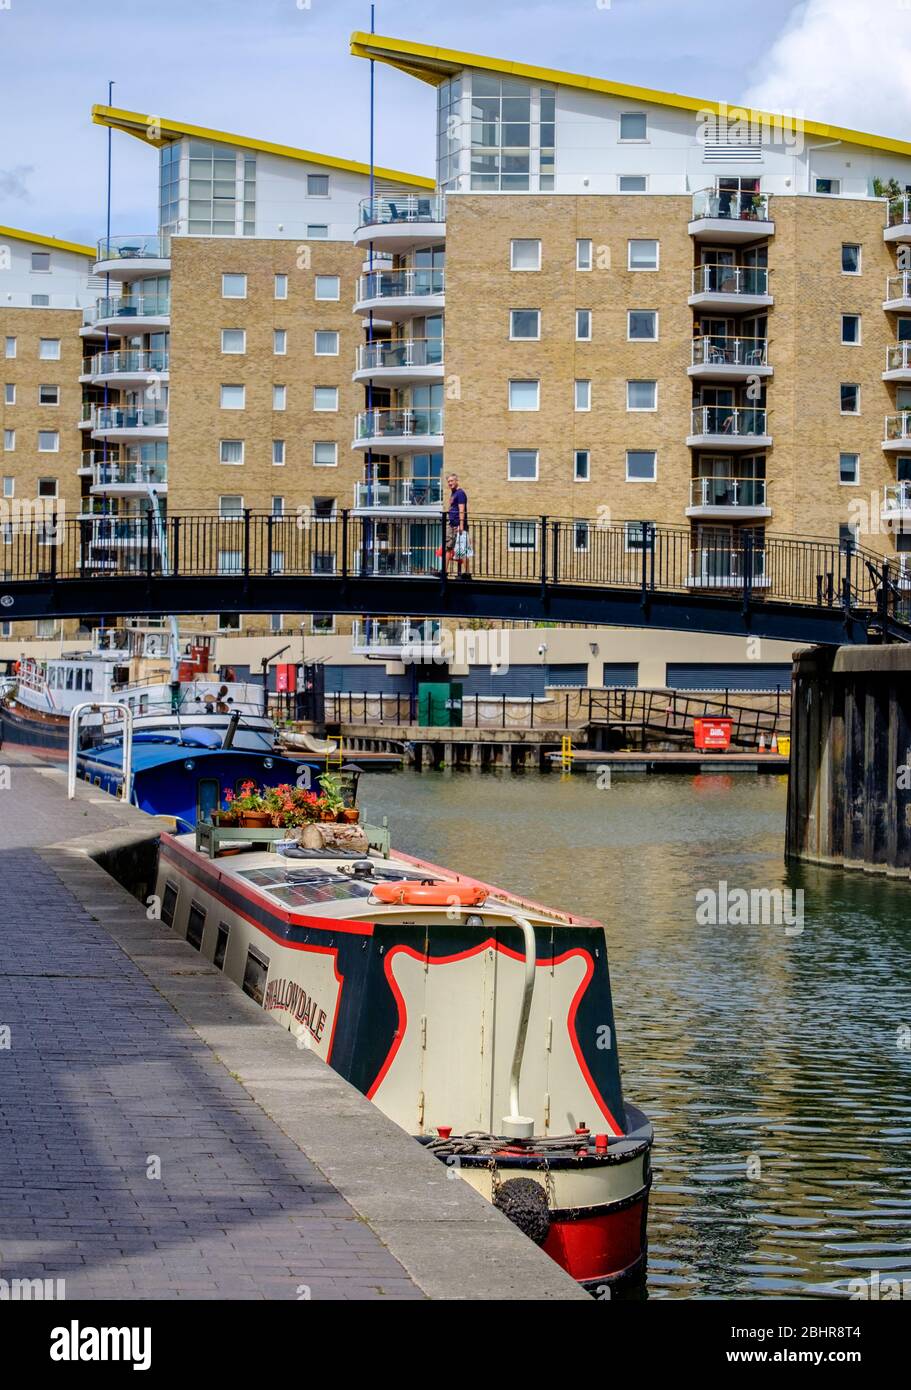 Moored boats at Limehouse Marina with tall residential buildings in the background. Tower  Hamlets, East London, England, UK Stock Photo